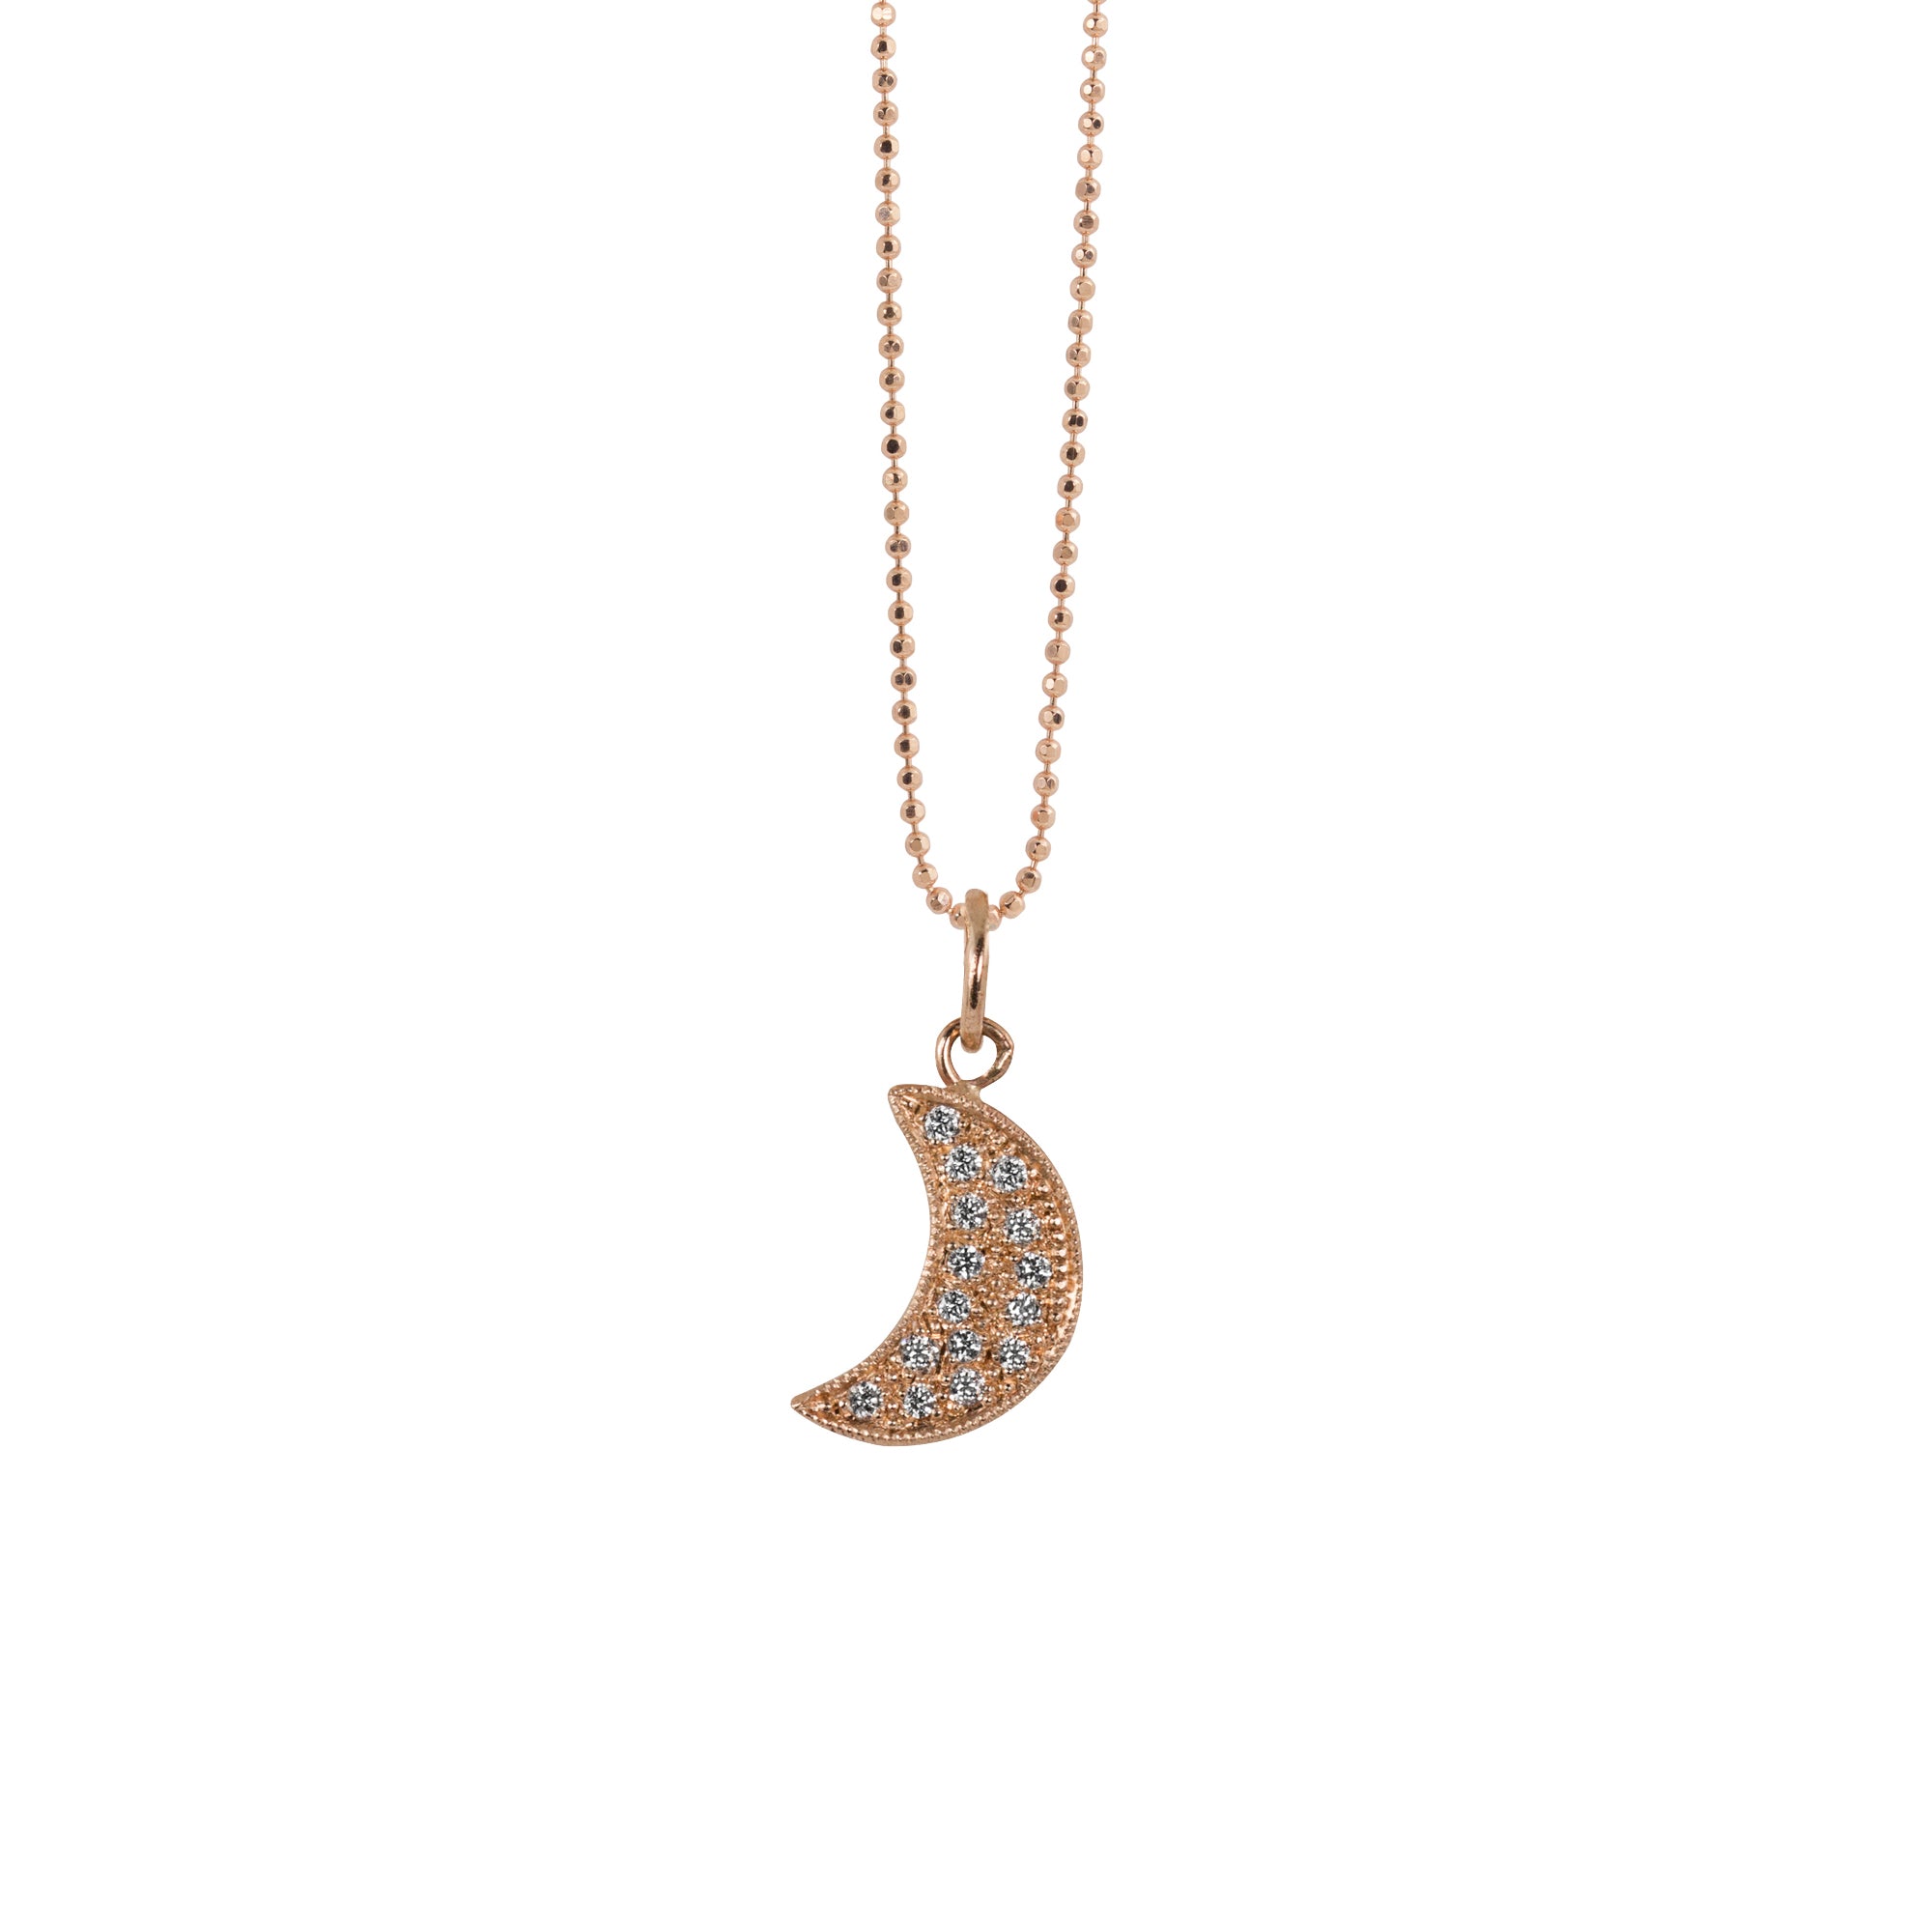 14k rose gold baby ALER moon charm with scattered diamonds